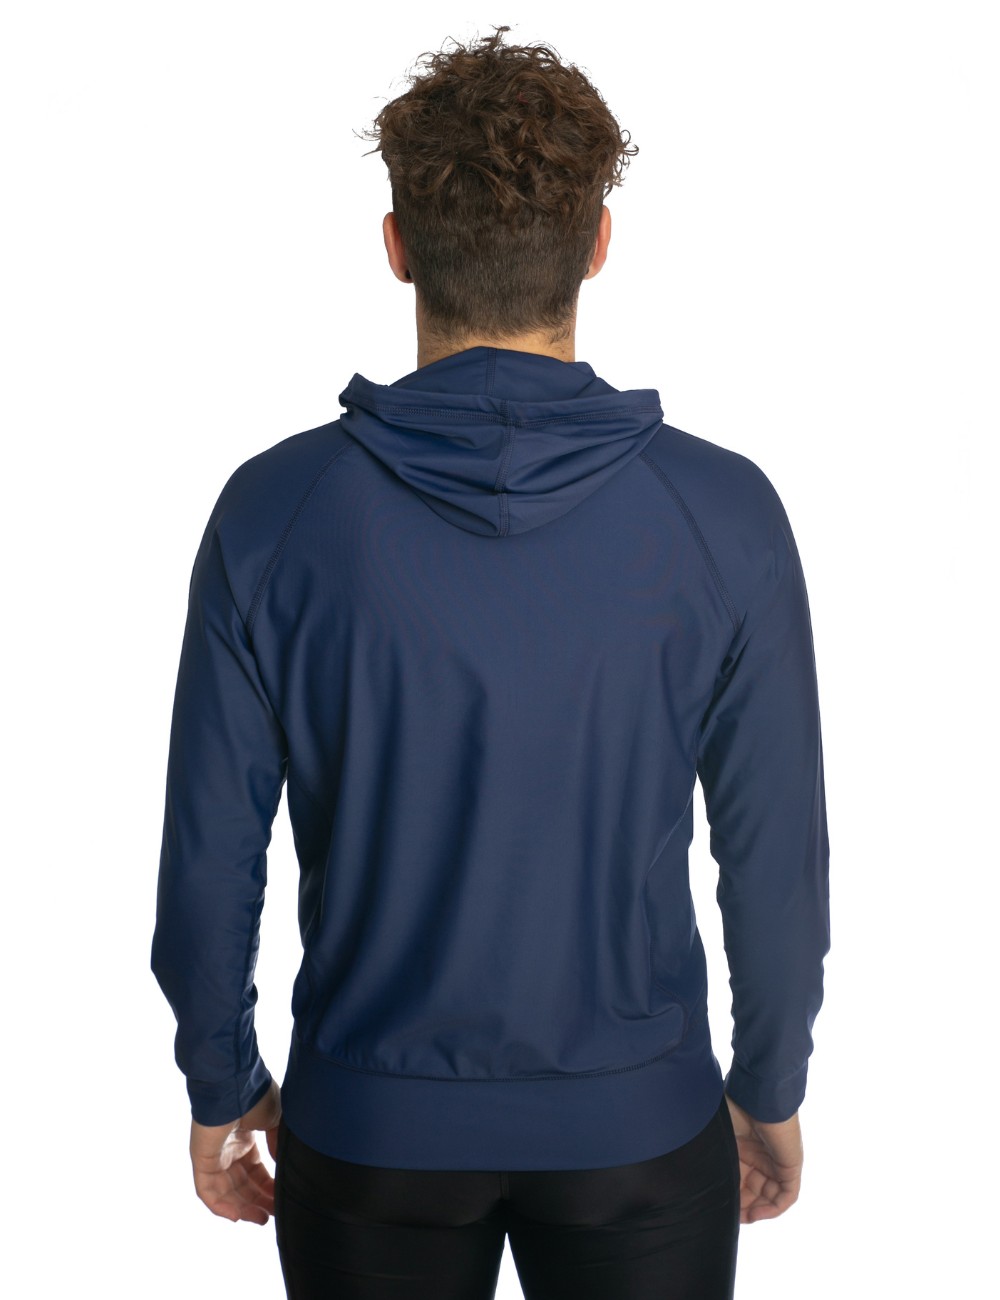 Men's hooded jacket with sun protection 